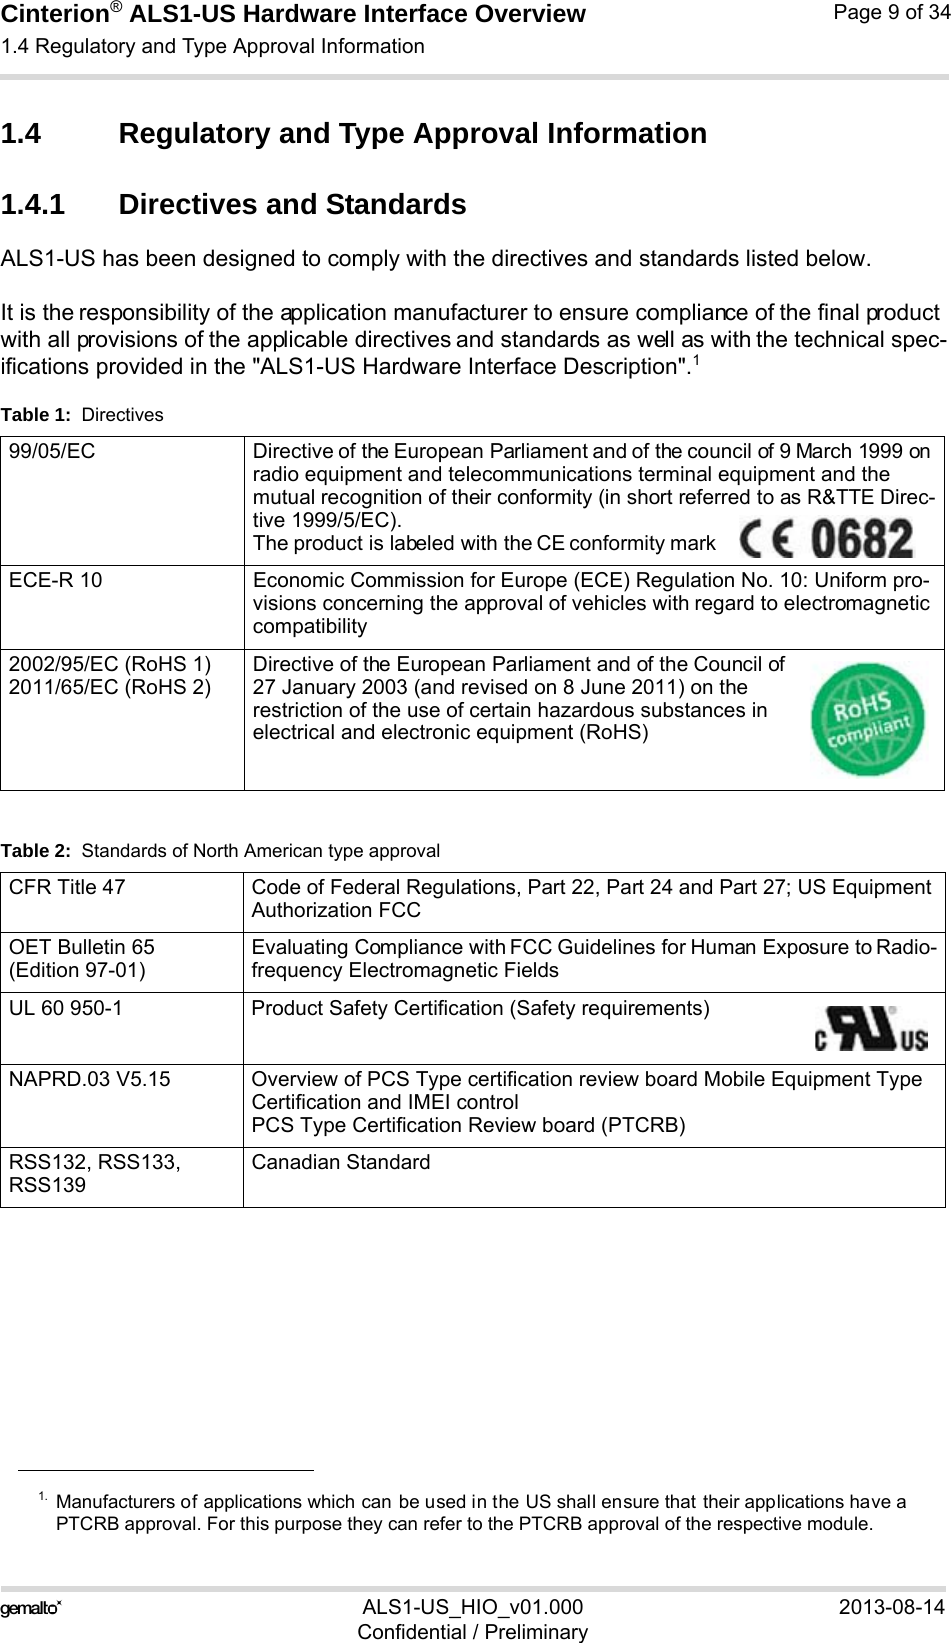 Cinterion® ALS1-US Hardware Interface Overview1.4 Regulatory and Type Approval Information13ALS1-US_HIO_v01.000 2013-08-14Confidential / PreliminaryPage 9 of 341.4 Regulatory and Type Approval Information1.4.1 Directives and StandardsALS1-US has been designed to comply with the directives and standards listed below.It is the responsibility of the application manufacturer to ensure compliance of the final product with all provisions of the applicable directives and standards as well as with the technical spec-ifications provided in the &quot;ALS1-US Hardware Interface Description&quot;.11. Manufacturers of applications which can be used in the US shall ensure that their applications have aPTCRB approval. For this purpose they can refer to the PTCRB approval of the respective module.Table 1:  Directives99/05/EC Directive of the European Parliament and of the council of 9 March 1999 on radio equipment and telecommunications terminal equipment and the mutual recognition of their conformity (in short referred to as R&amp;TTE Direc-tive 1999/5/EC).The product is labeled with the CE conformity mark   ECE-R 10 Economic Commission for Europe (ECE) Regulation No. 10: Uniform pro-visions concerning the approval of vehicles with regard to electromagnetic compatibility2002/95/EC (RoHS 1)2011/65/EC (RoHS 2)Directive of the European Parliament and of the Council of 27 January 2003 (and revised on 8 June 2011) on the restriction of the use of certain hazardous substances in electrical and electronic equipment (RoHS)Table 2:  Standards of North American type approvalCFR Title 47 Code of Federal Regulations, Part 22, Part 24 and Part 27; US Equipment Authorization FCCOET Bulletin 65(Edition 97-01)Evaluating Compliance with FCC Guidelines for Human Exposure to Radio-frequency Electromagnetic FieldsUL 60 950-1 Product Safety Certification (Safety requirements) NAPRD.03 V5.15 Overview of PCS Type certification review board Mobile Equipment Type Certification and IMEI controlPCS Type Certification Review board (PTCRB)RSS132, RSS133, RSS139Canadian Standard